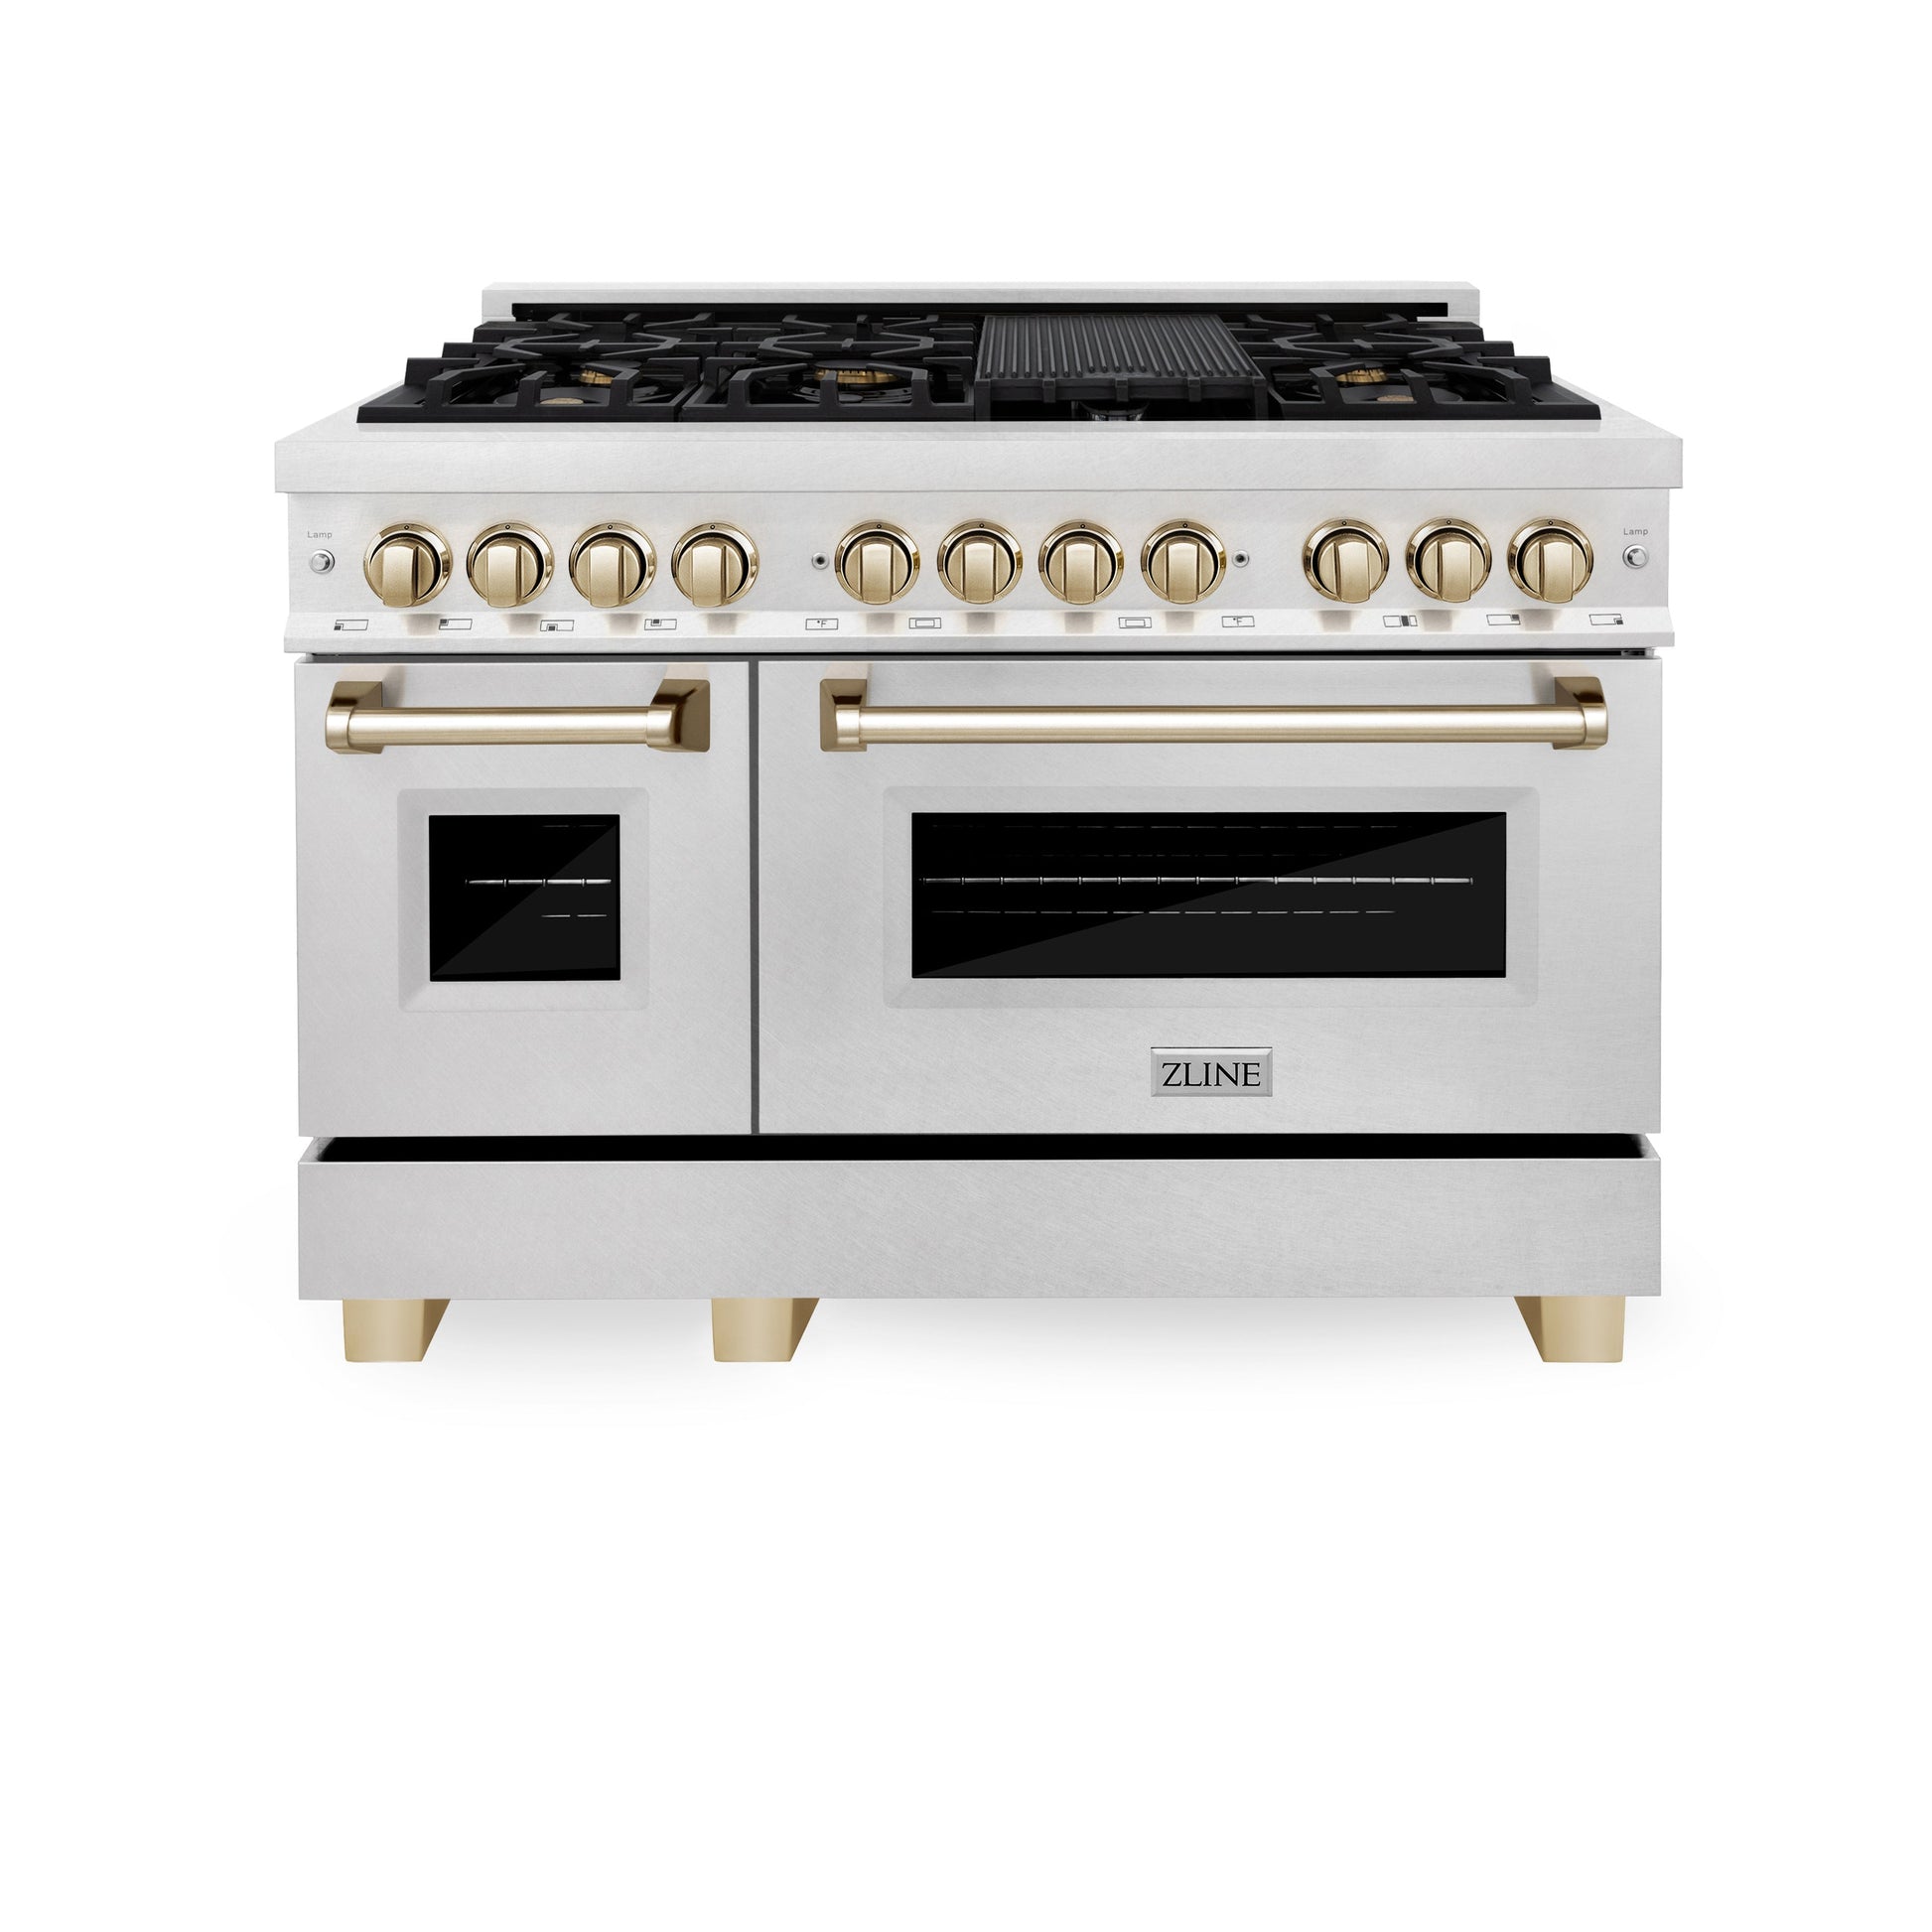 ZLINE Autograph Edition 48" Dual Fuel Range with Gas Stove and Electric Oven - Fingerprint Resistant Stainless Steel with Accents